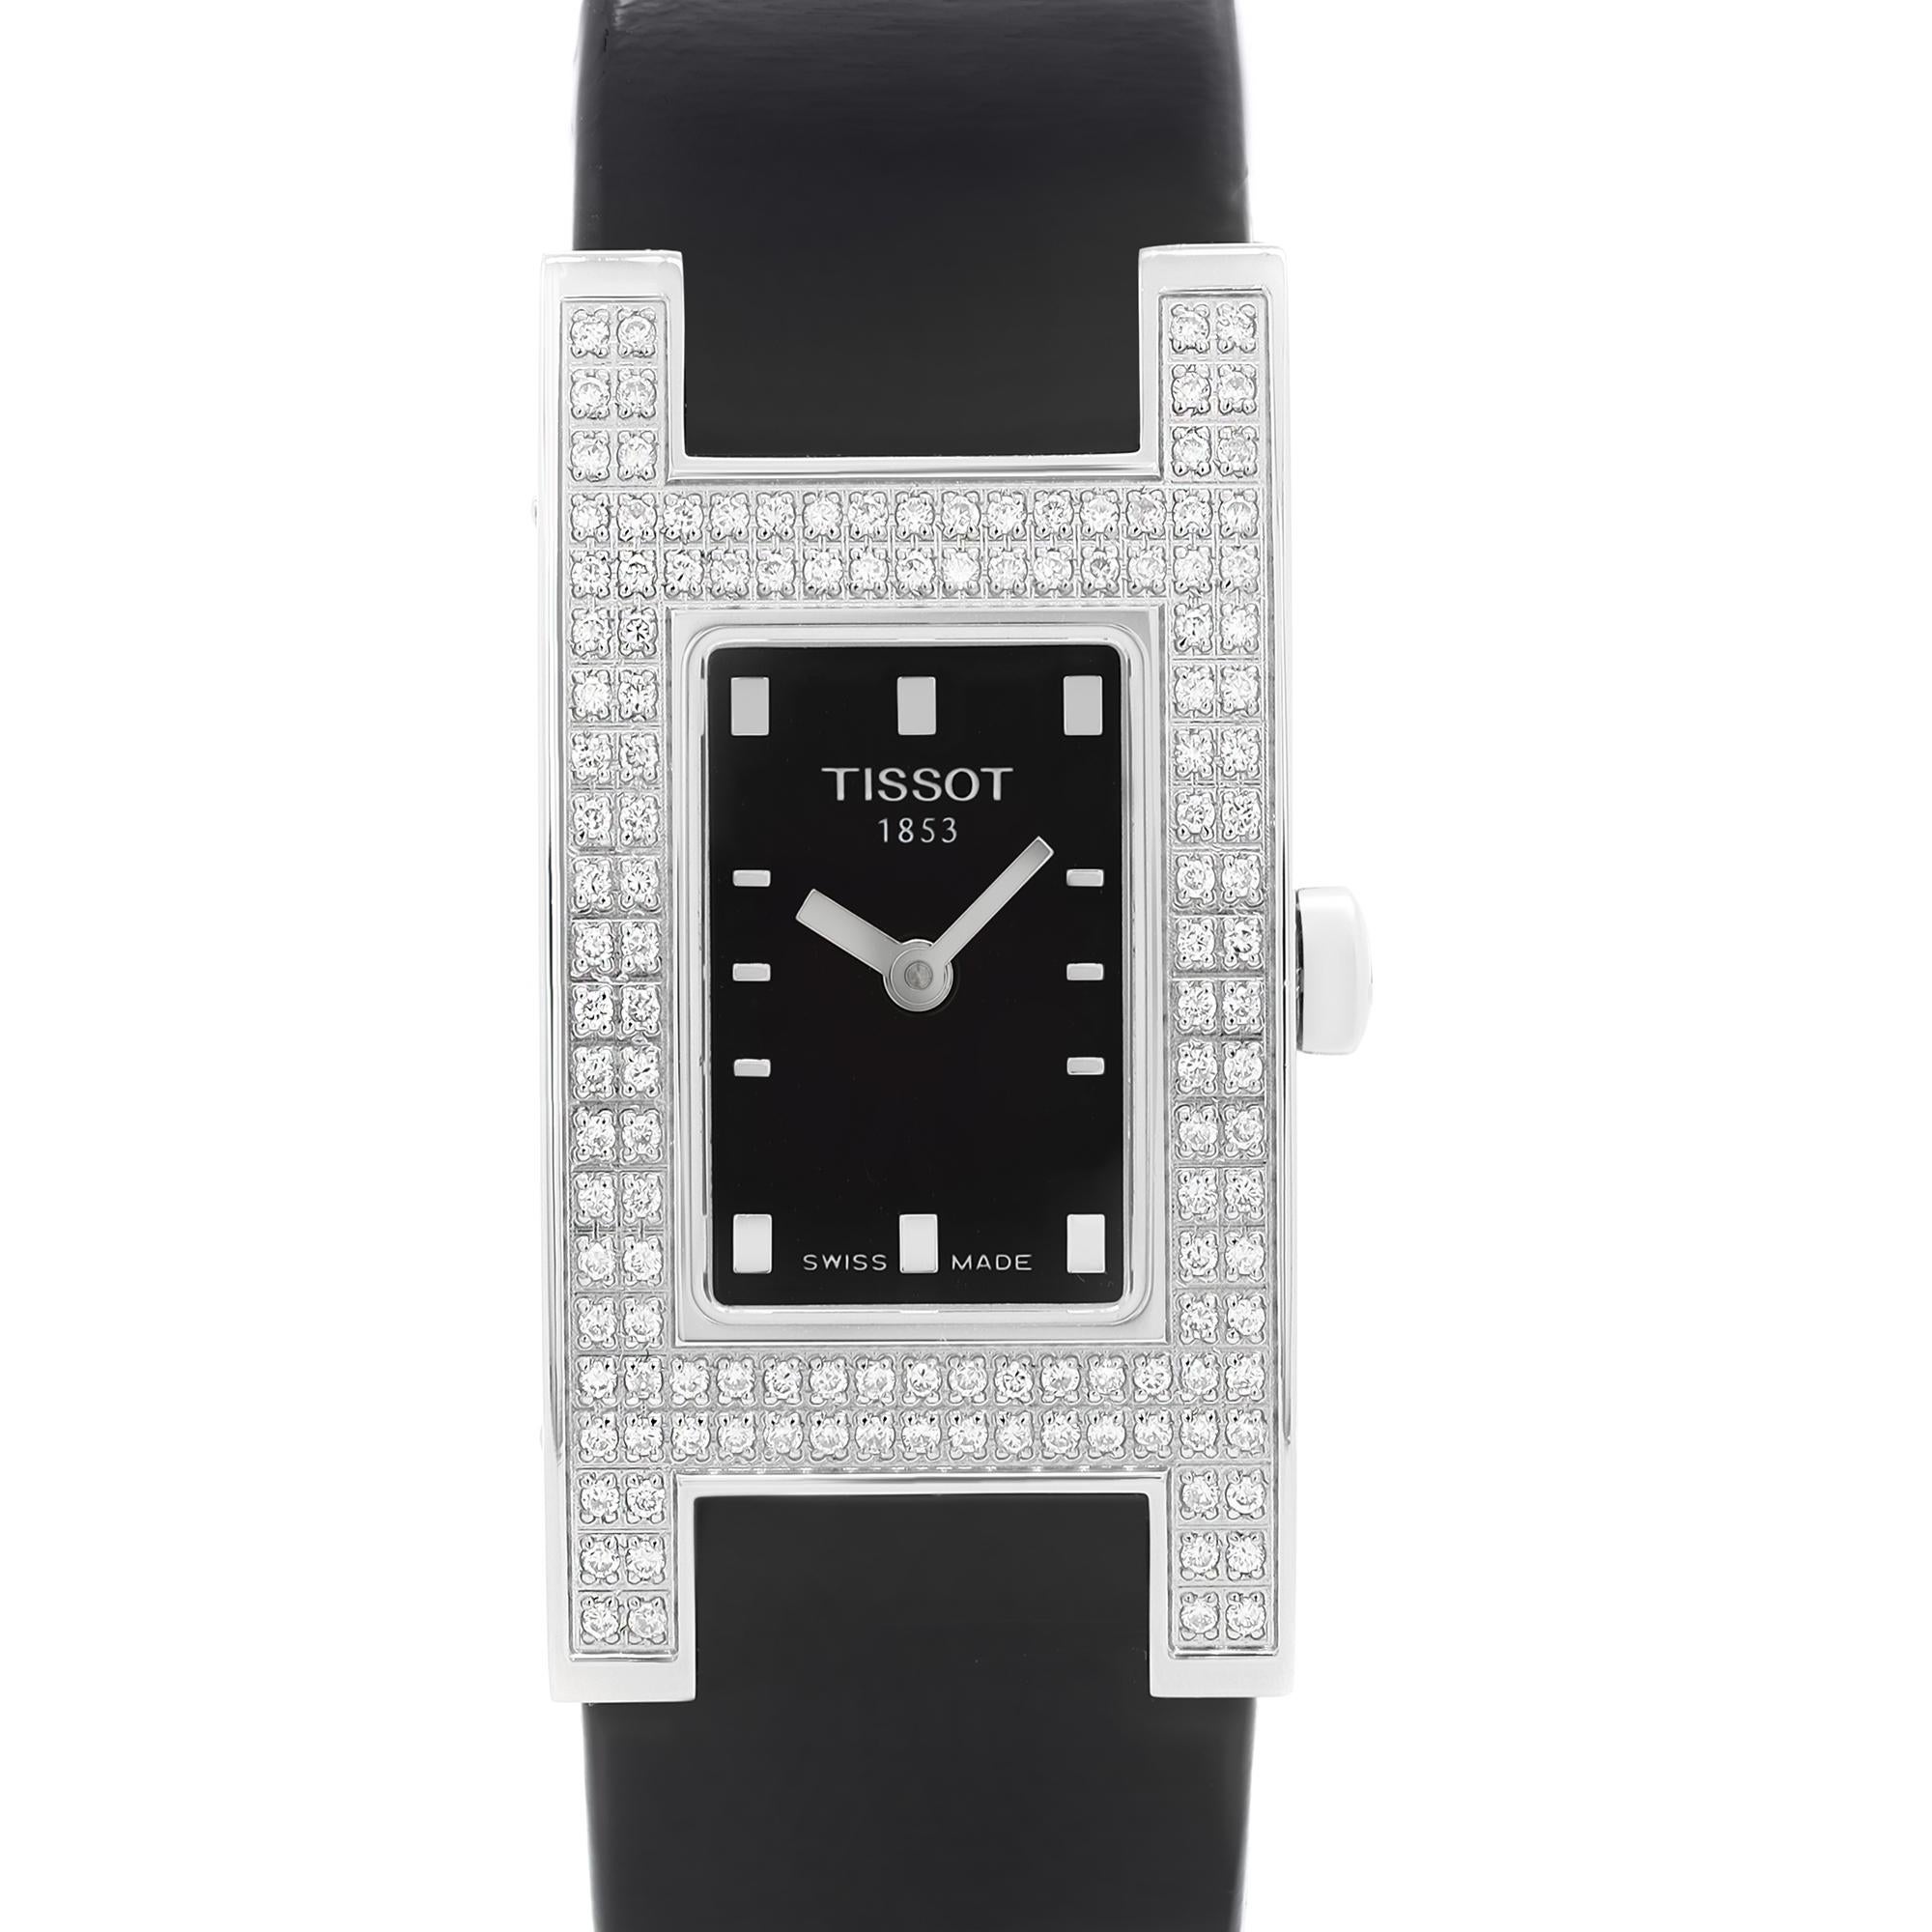 Display Model Tissot T-Trend Bellflower Ladies Watch T11.1.425.51. This Beautiful Timepiece is Powered by Quartz (Battery) Movement. Features: Rectangular Stainless Steel Case with a Black Leather Strap Fixed Stainless Steel Bezel Set with Diamonds,